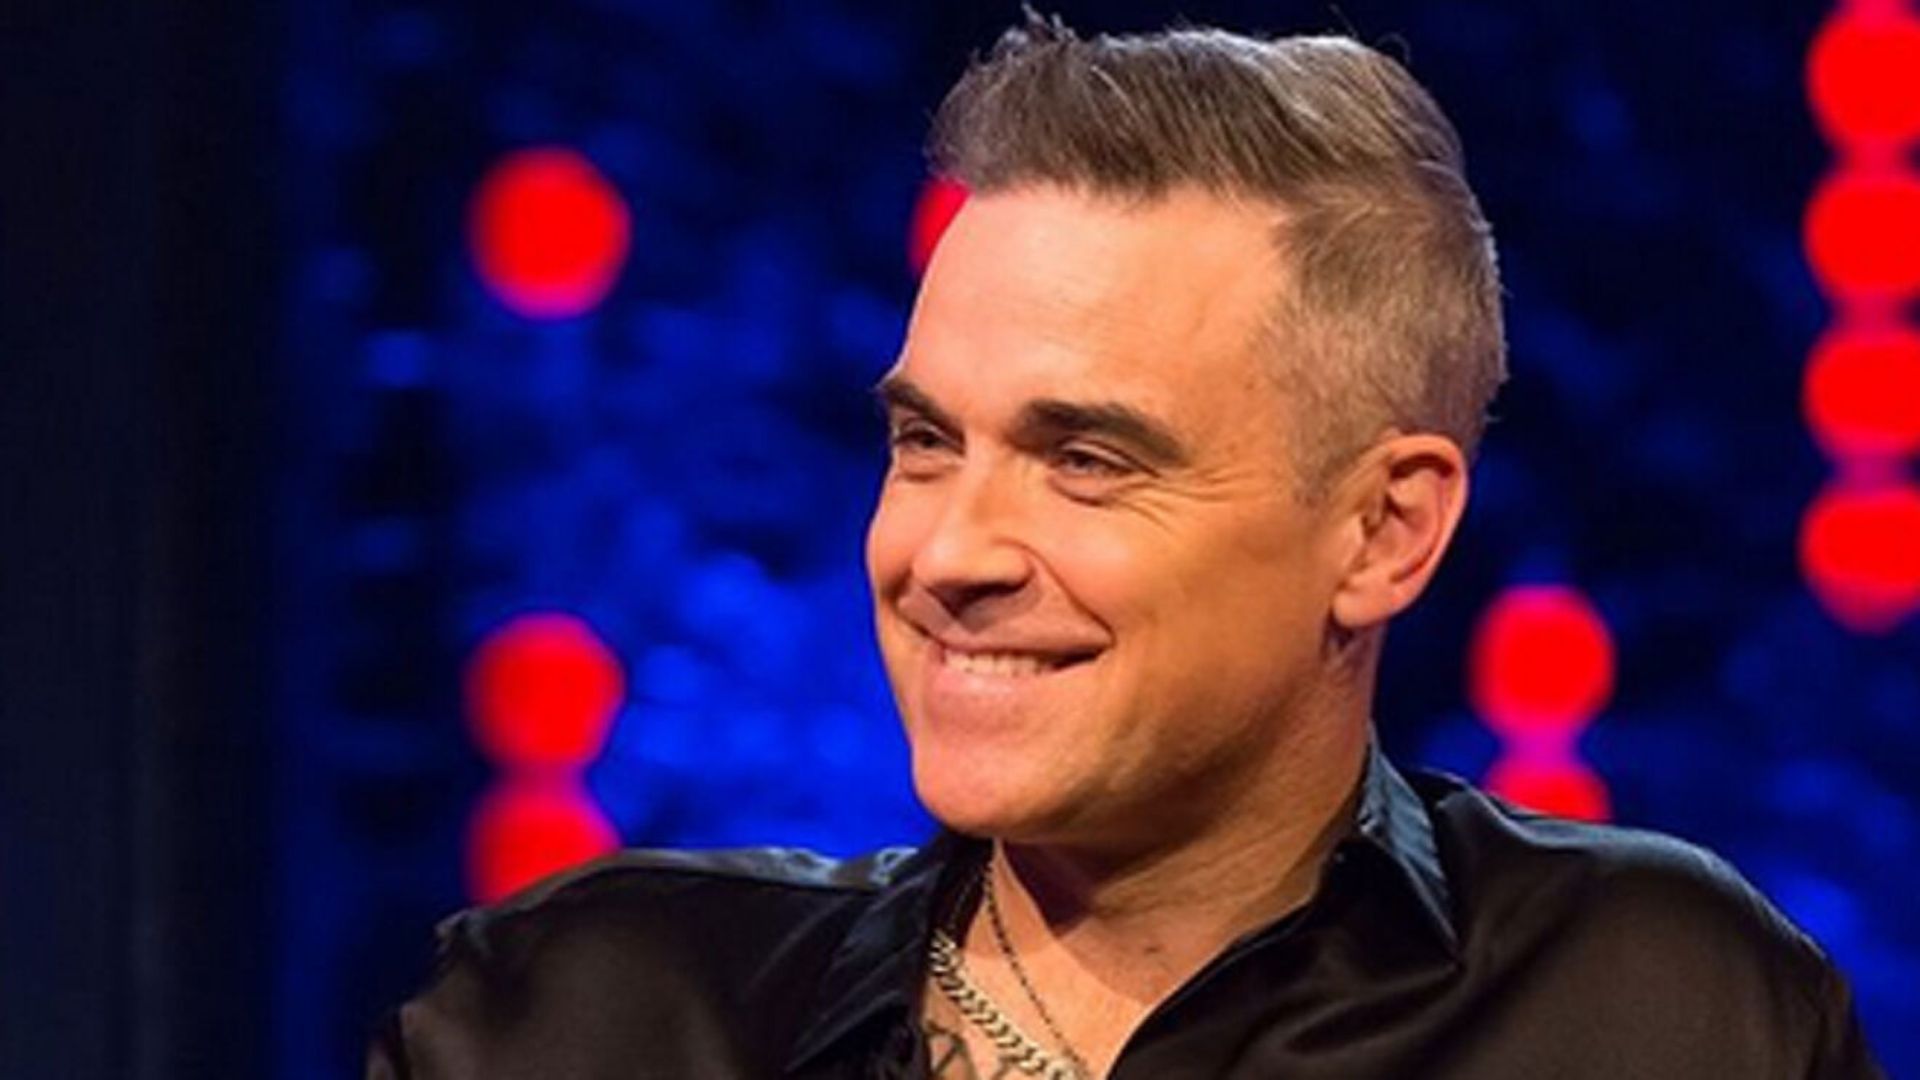 Robbie Williams at Vale Park Final 10,000 tickets available to anyone